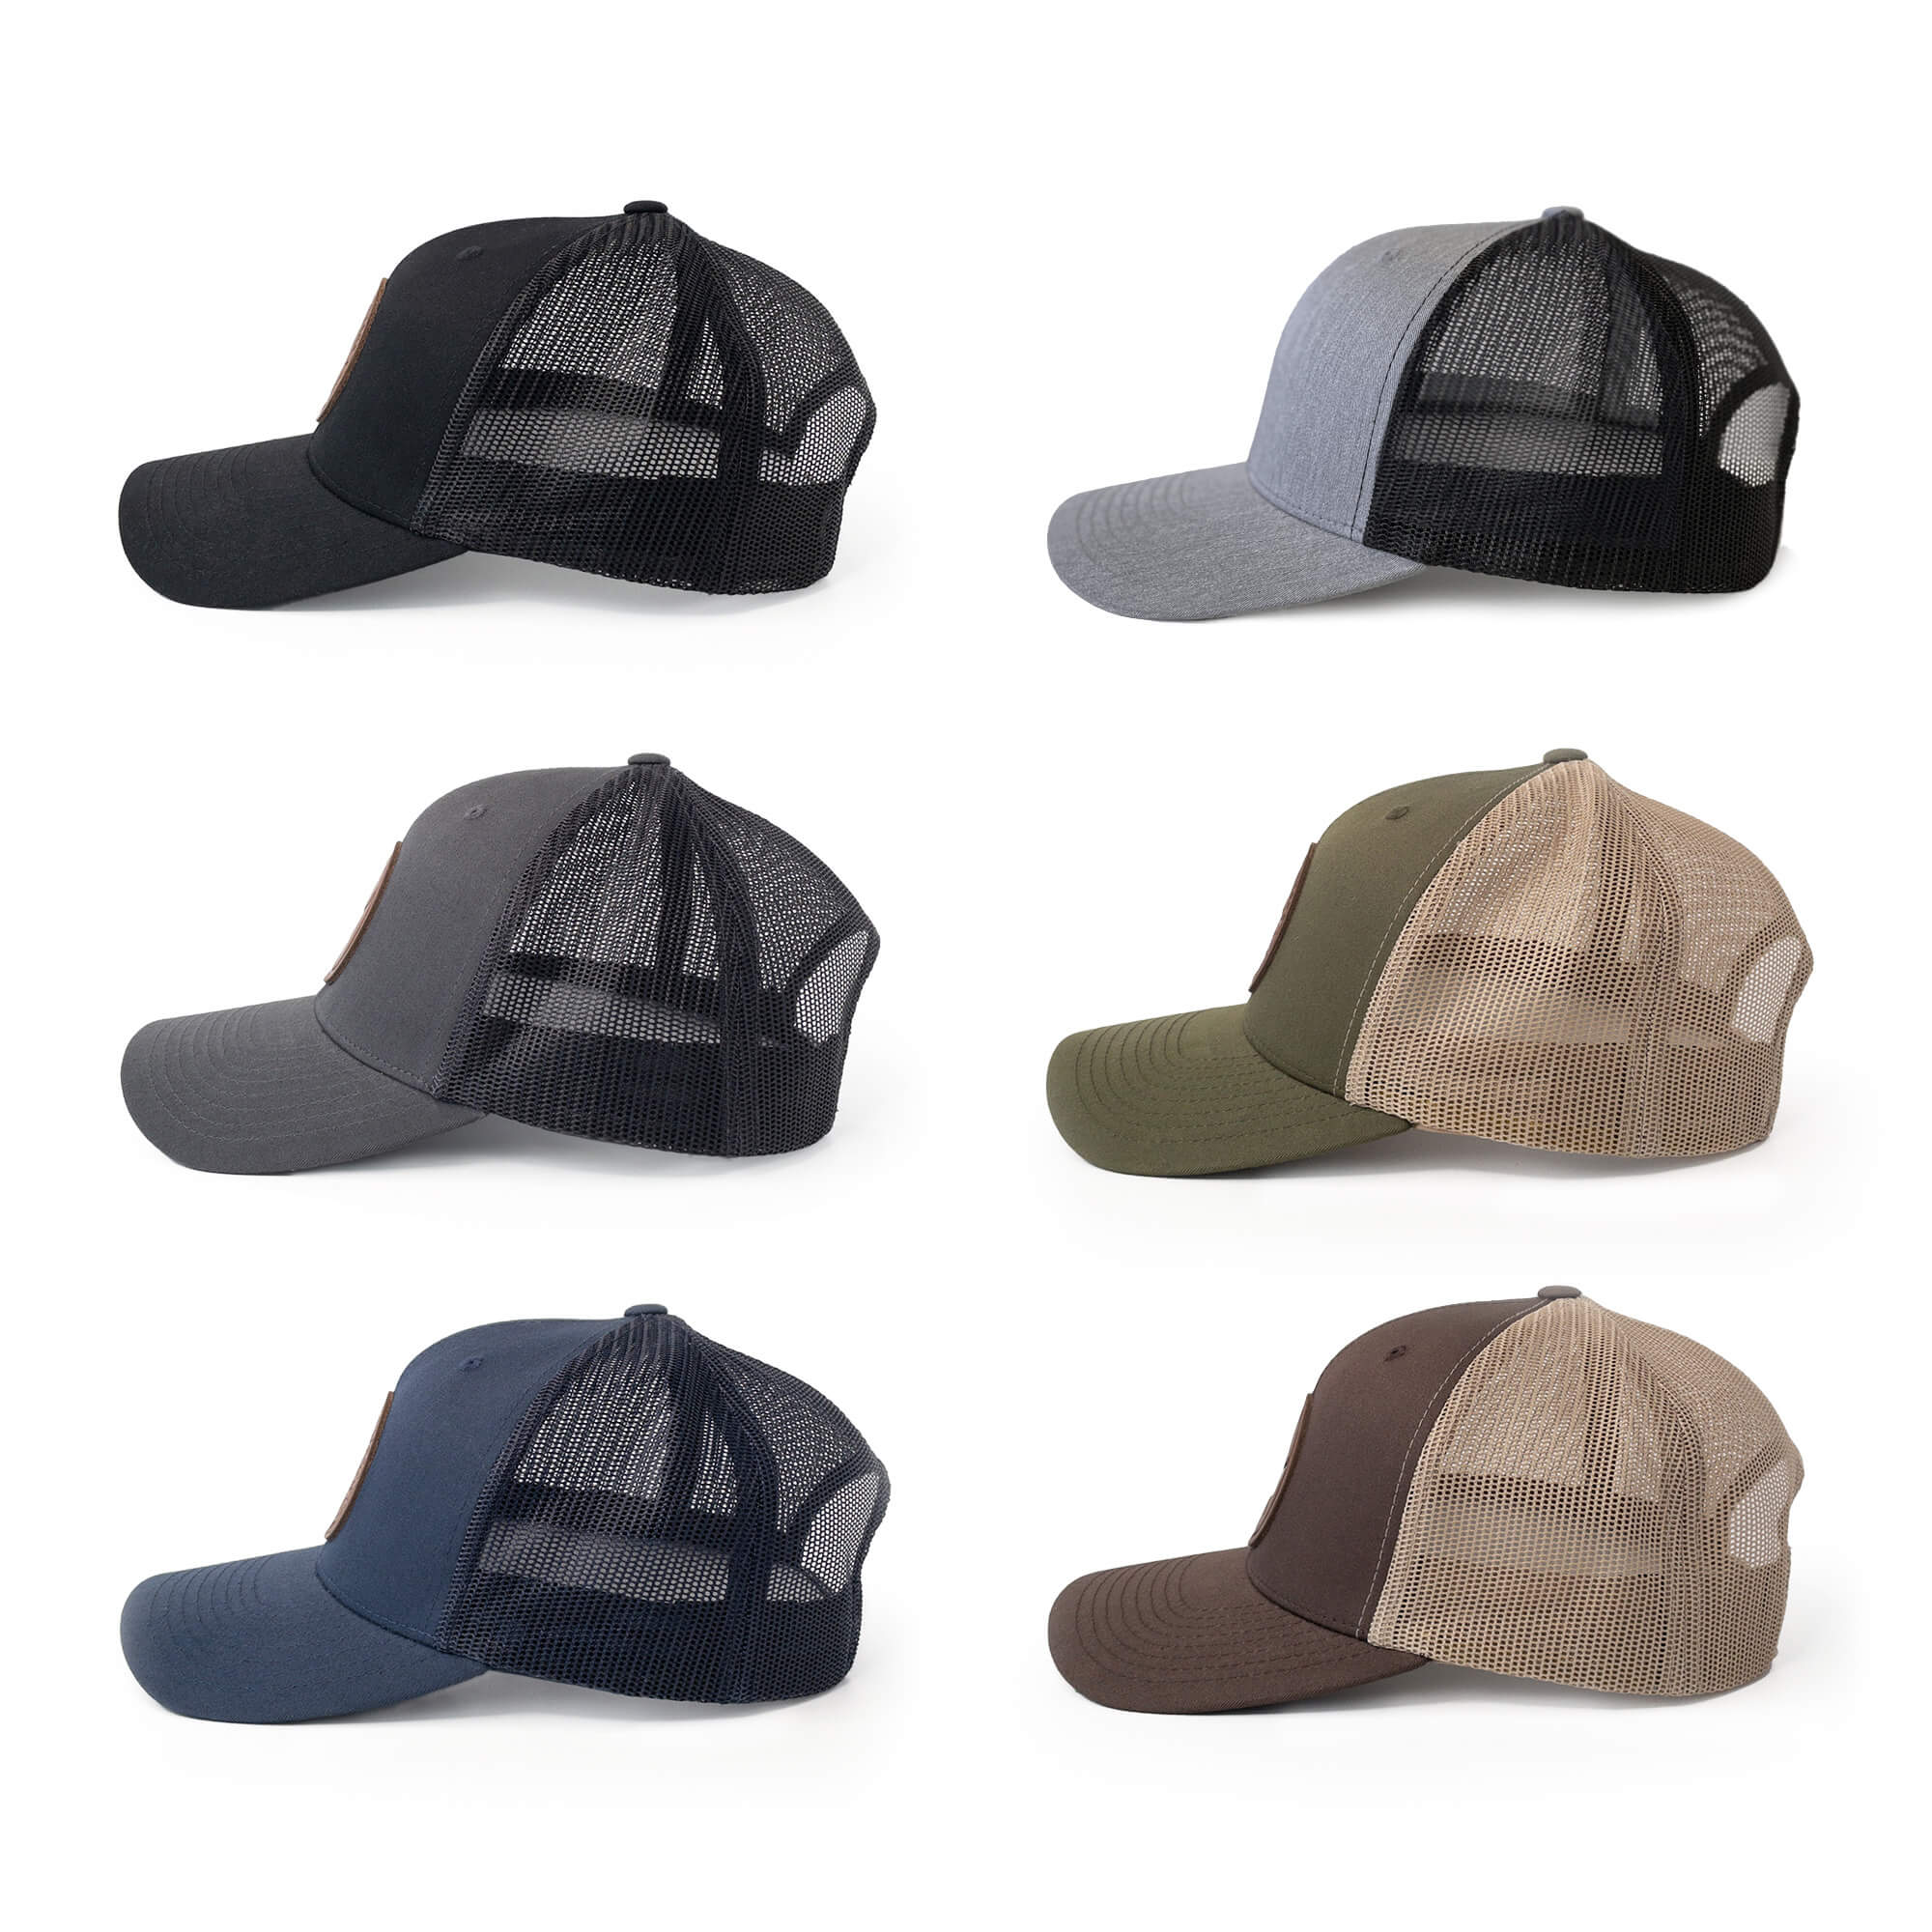 Leather patch trucker hats available in 6 colors | BLACK-002-006, CHARC-002-006, NAVY-002-006, HGREY-002-006, MOSS-002-006, BROWN-002-006